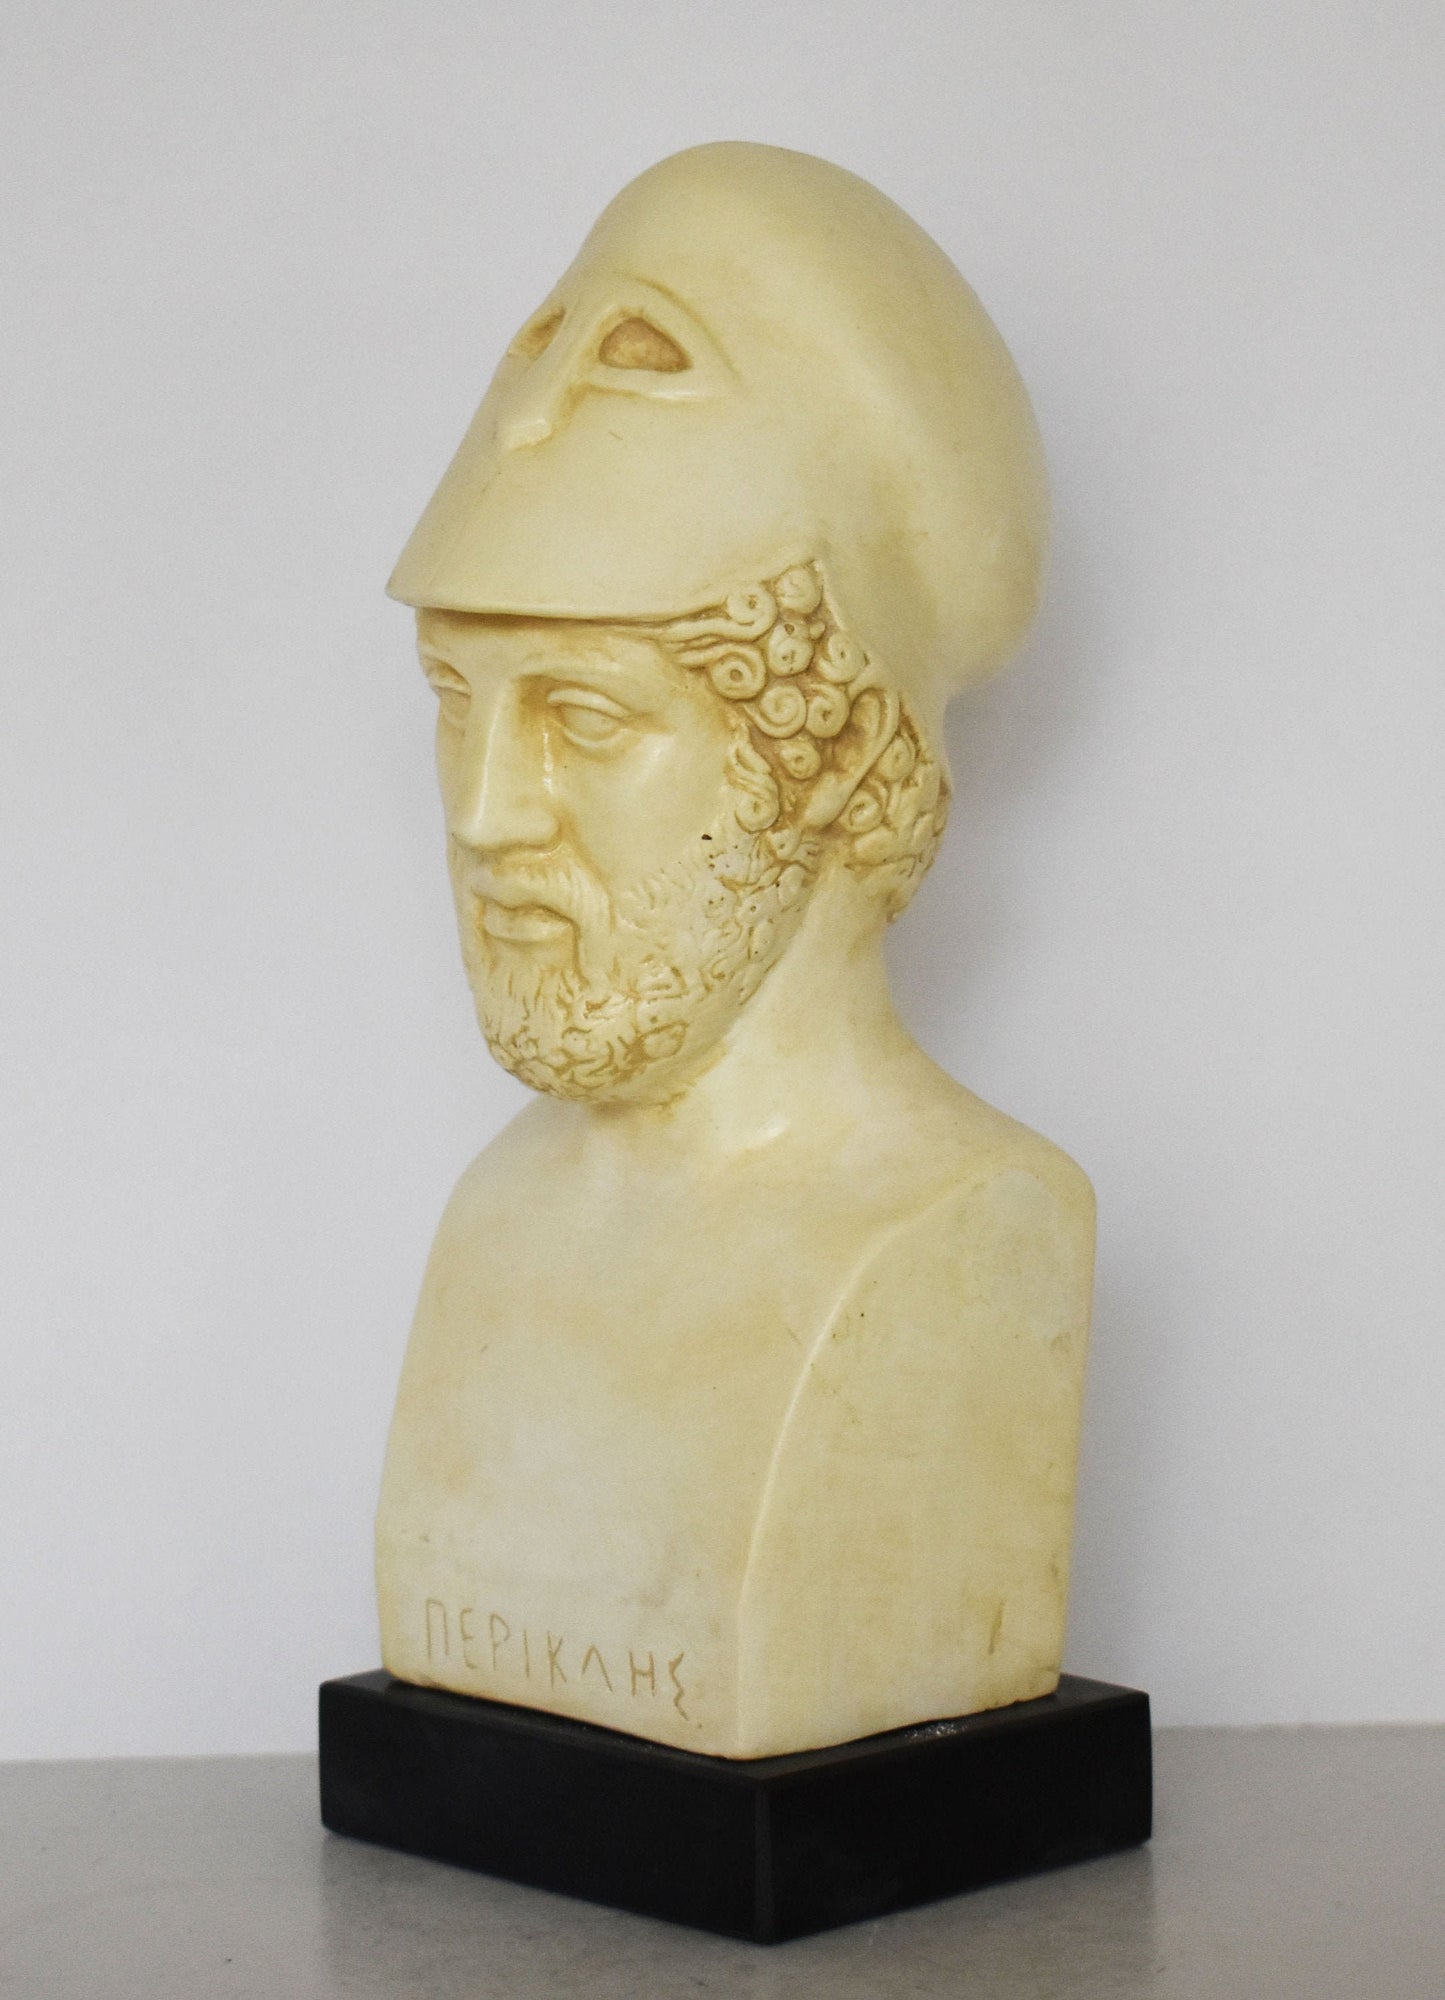 Pericles - Ancient Greek Statesman, Orator and General of Athens - Marble Base - Museum Reproduction - Head Bust